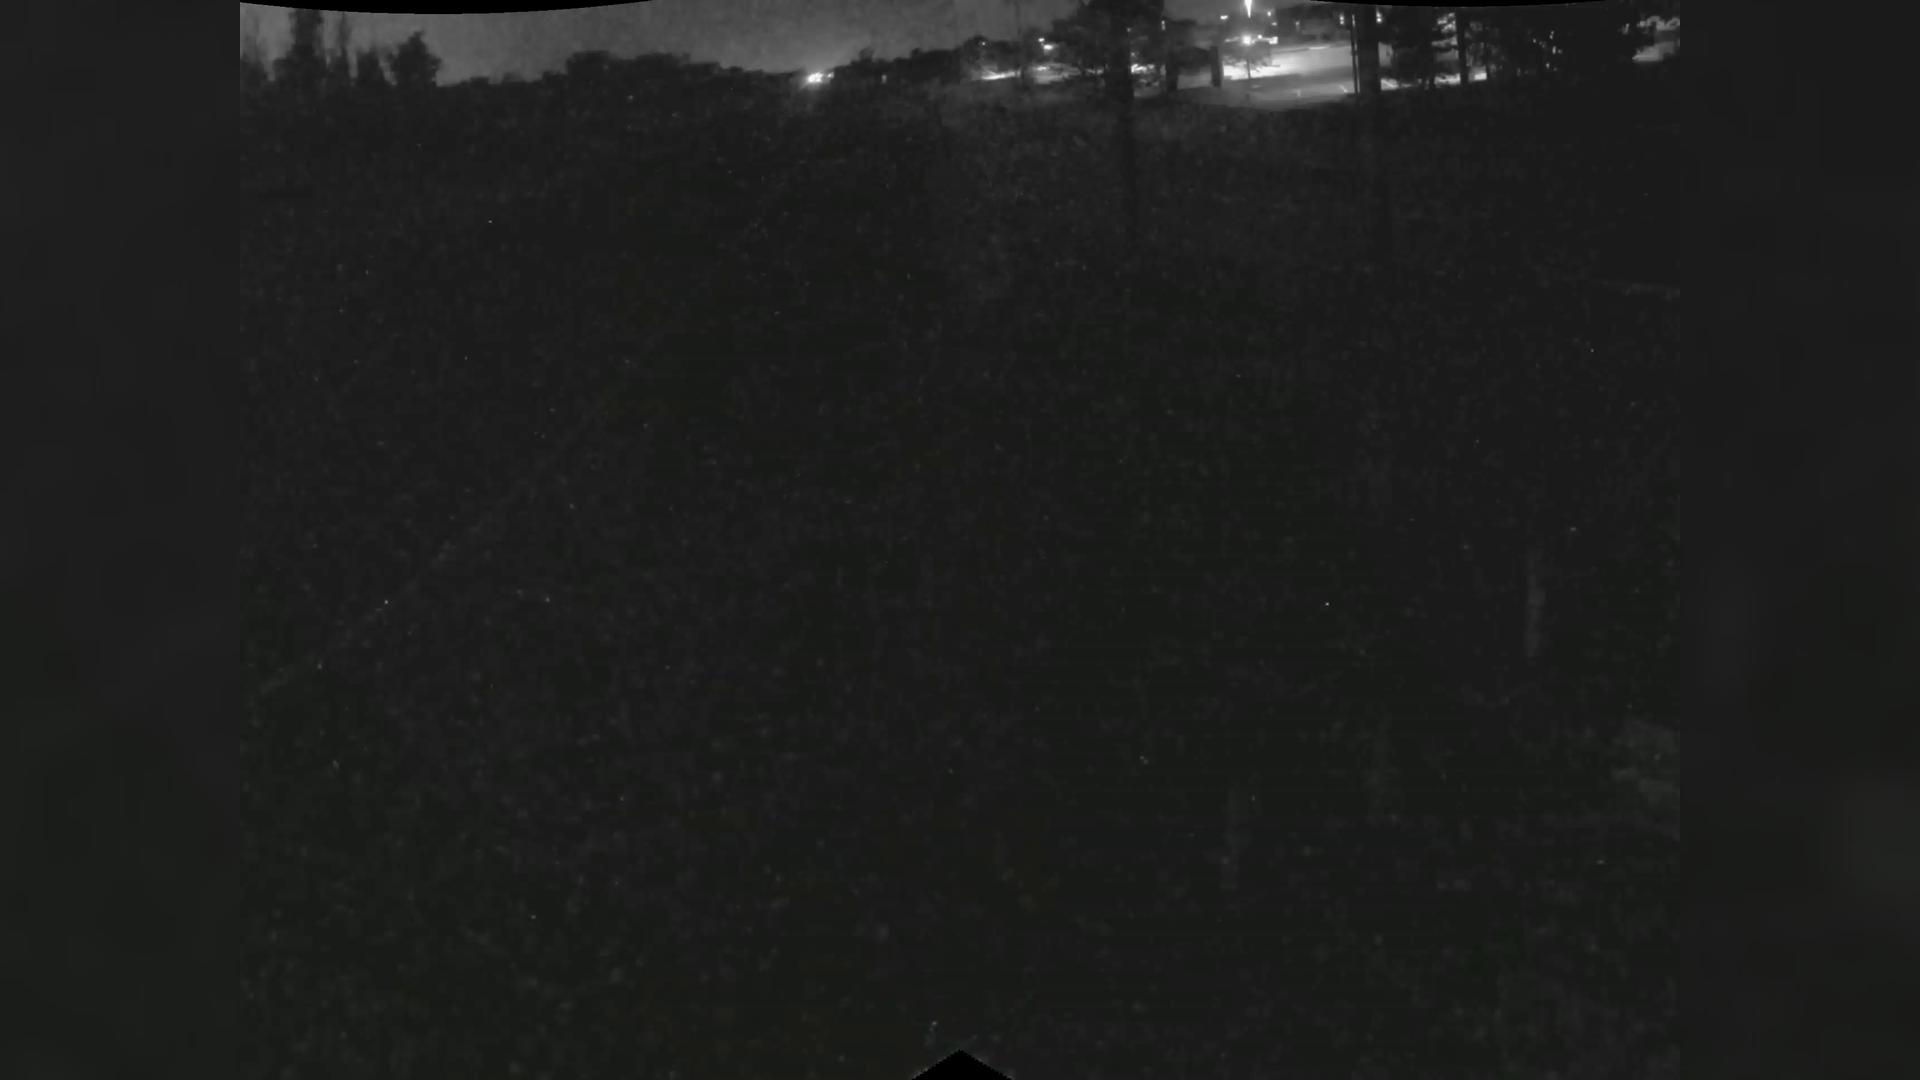 Delevan › West: Route 179 Westbound at Route 219 Traffic Camera